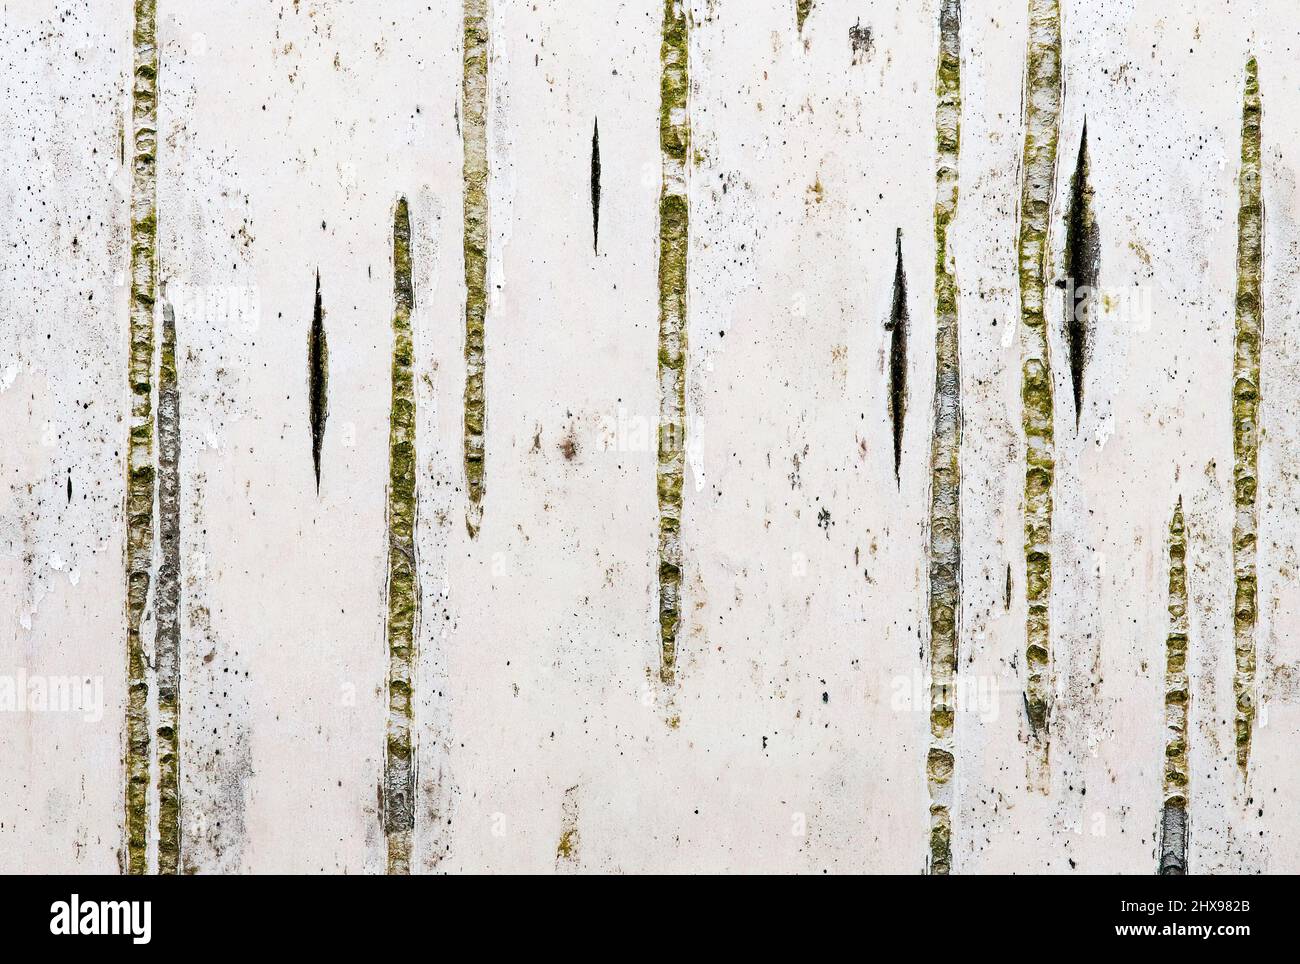 Birch bark abstract suggesting snowy landscape with trees Stock Photo